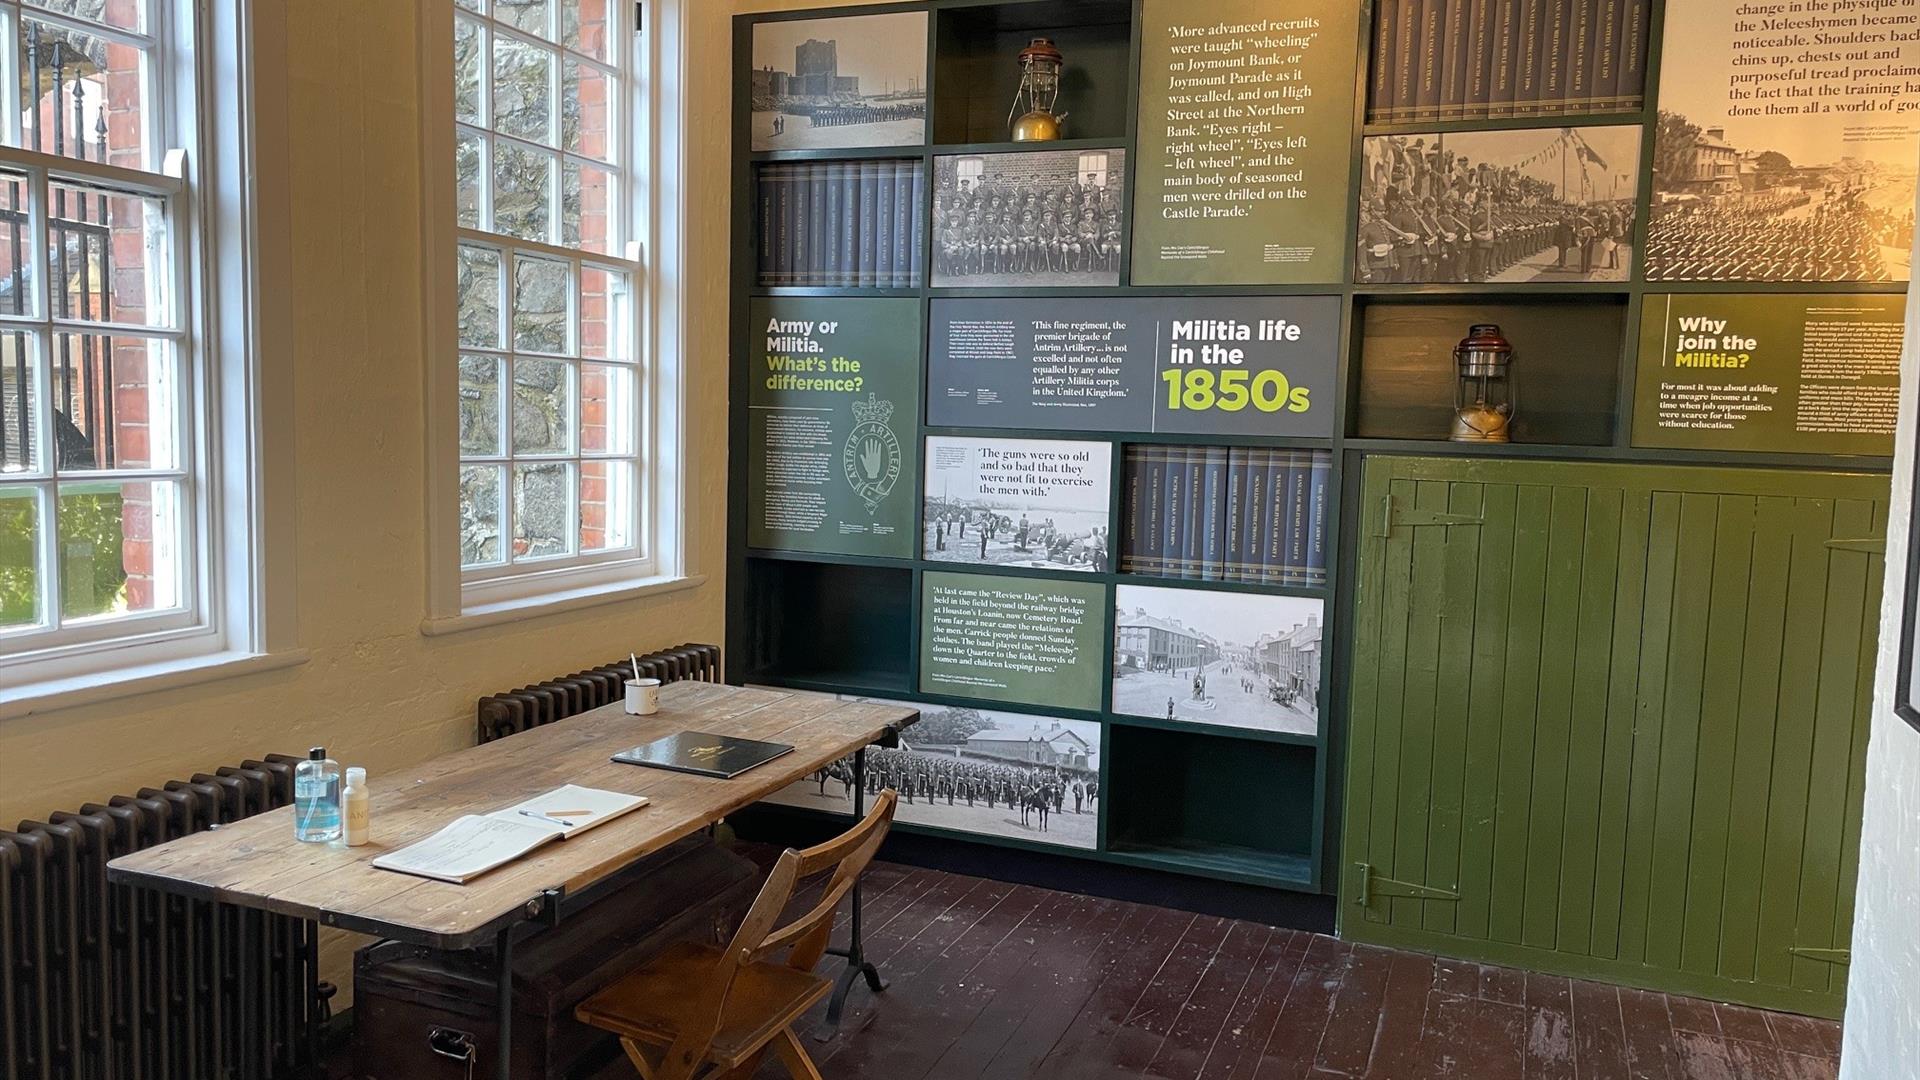 Interior of the Guard Room with information panels on wall and desk with Visitor Book